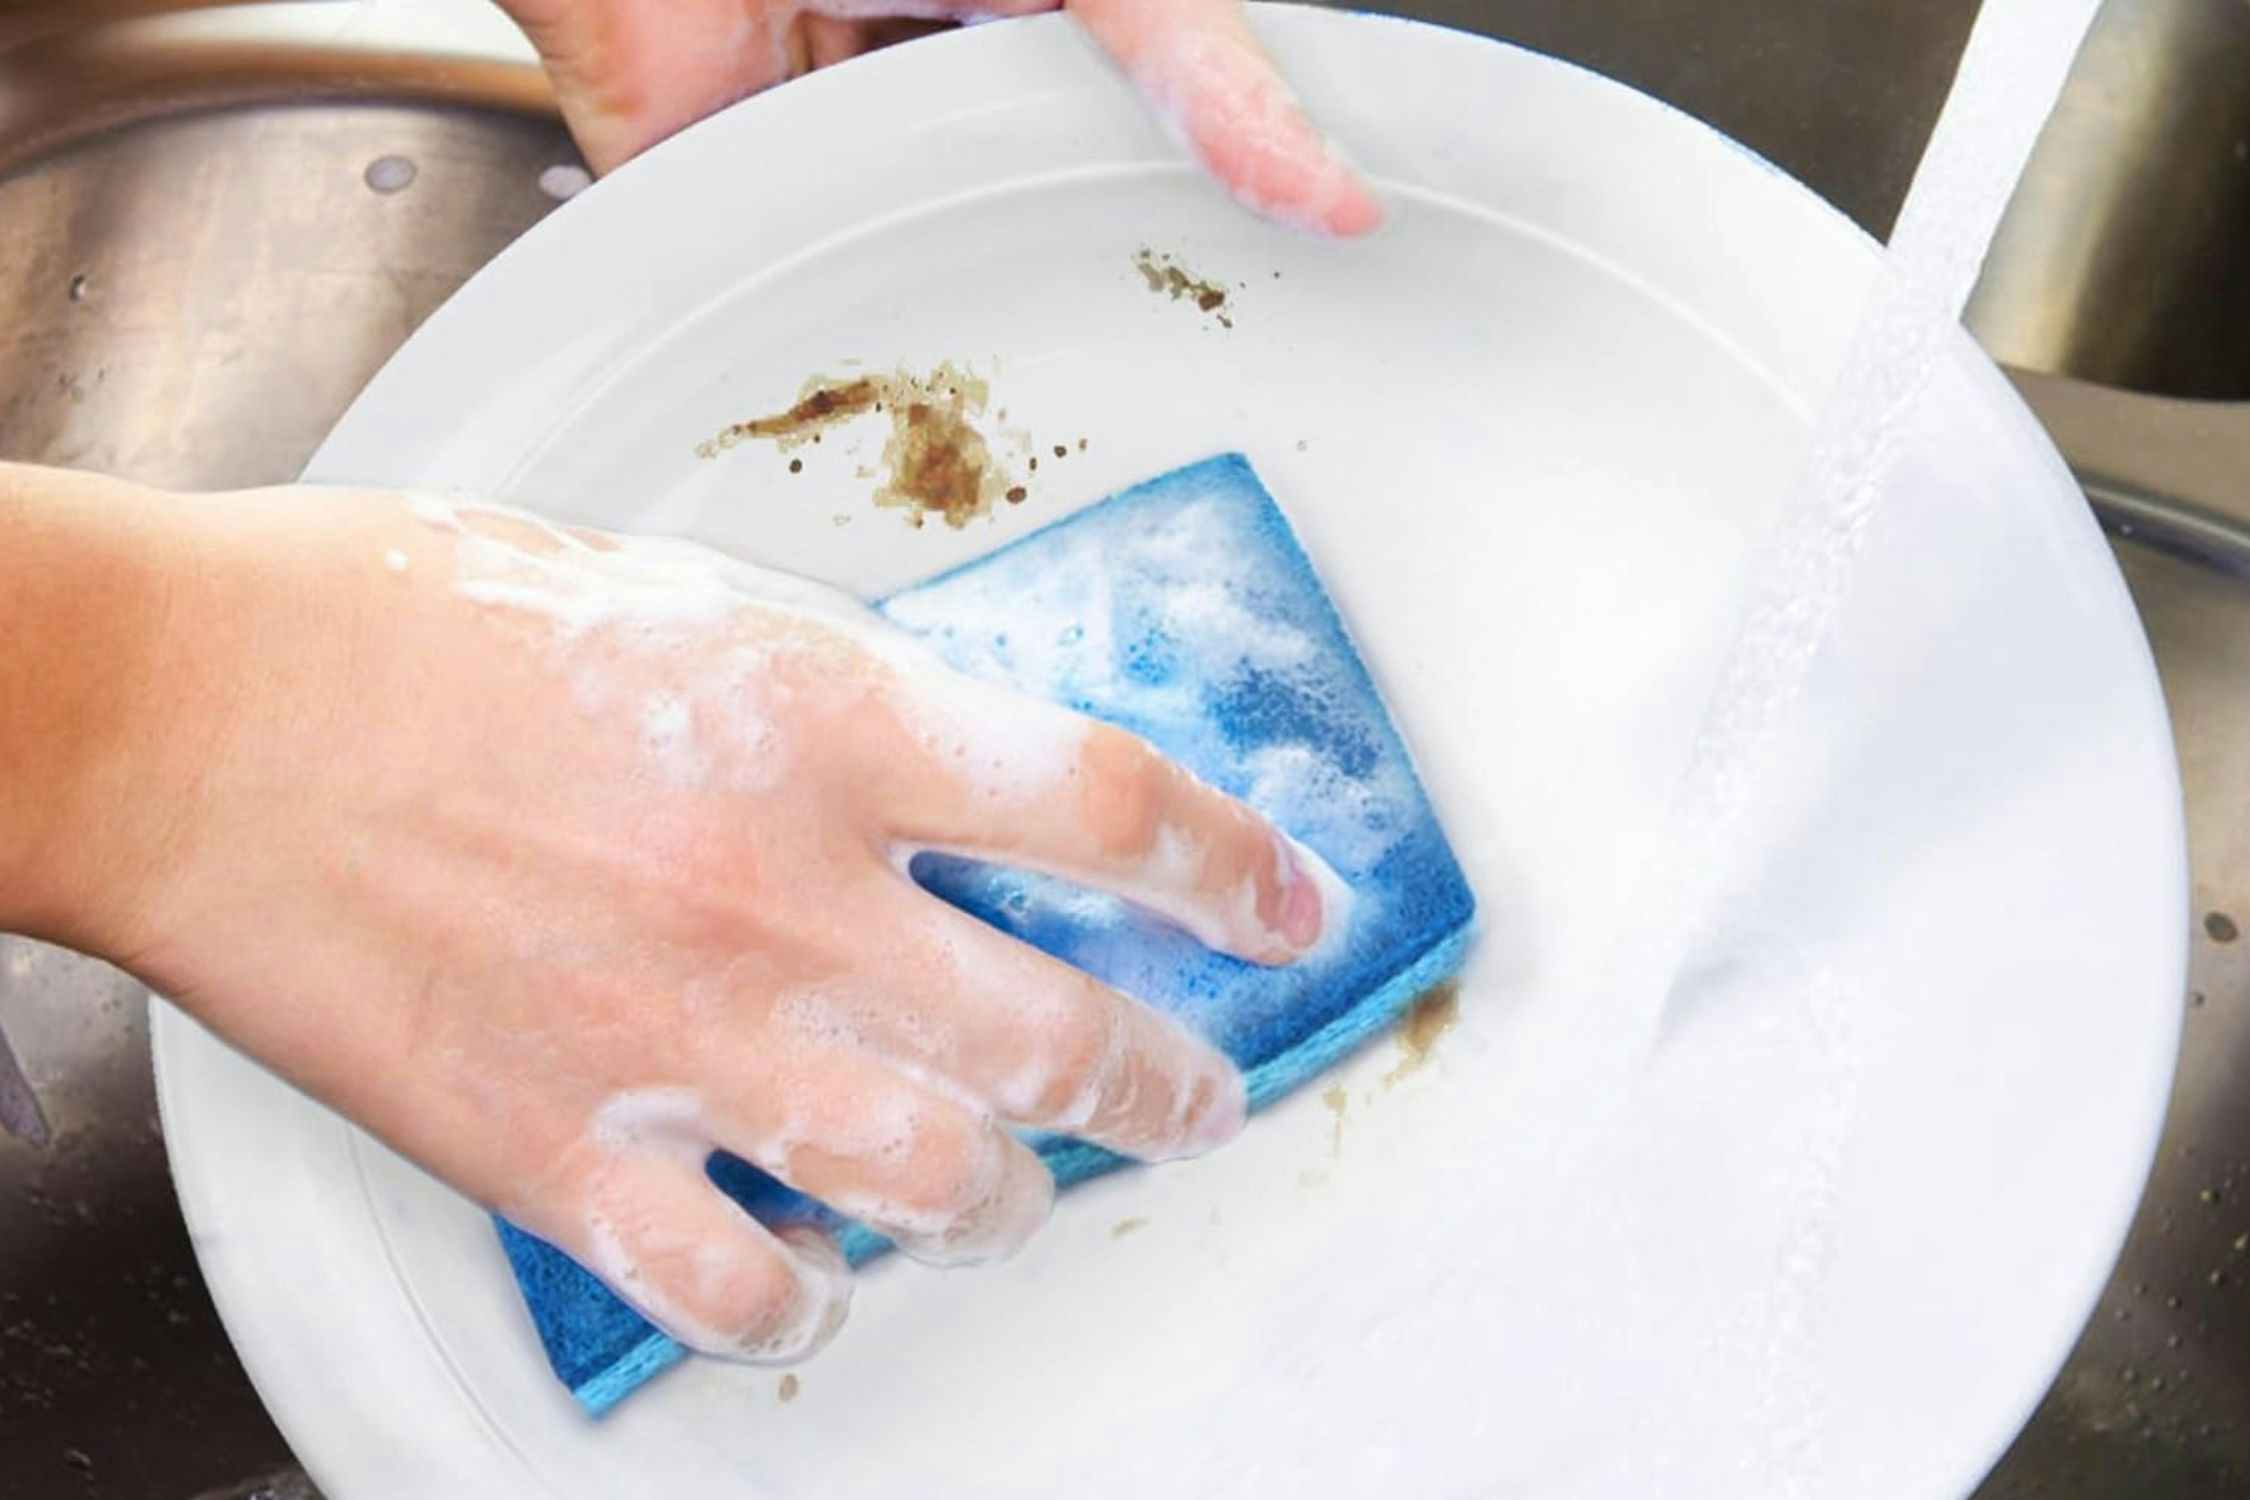 Get 24 Cleaning Sponges for as Low as $8.54 on Amazon